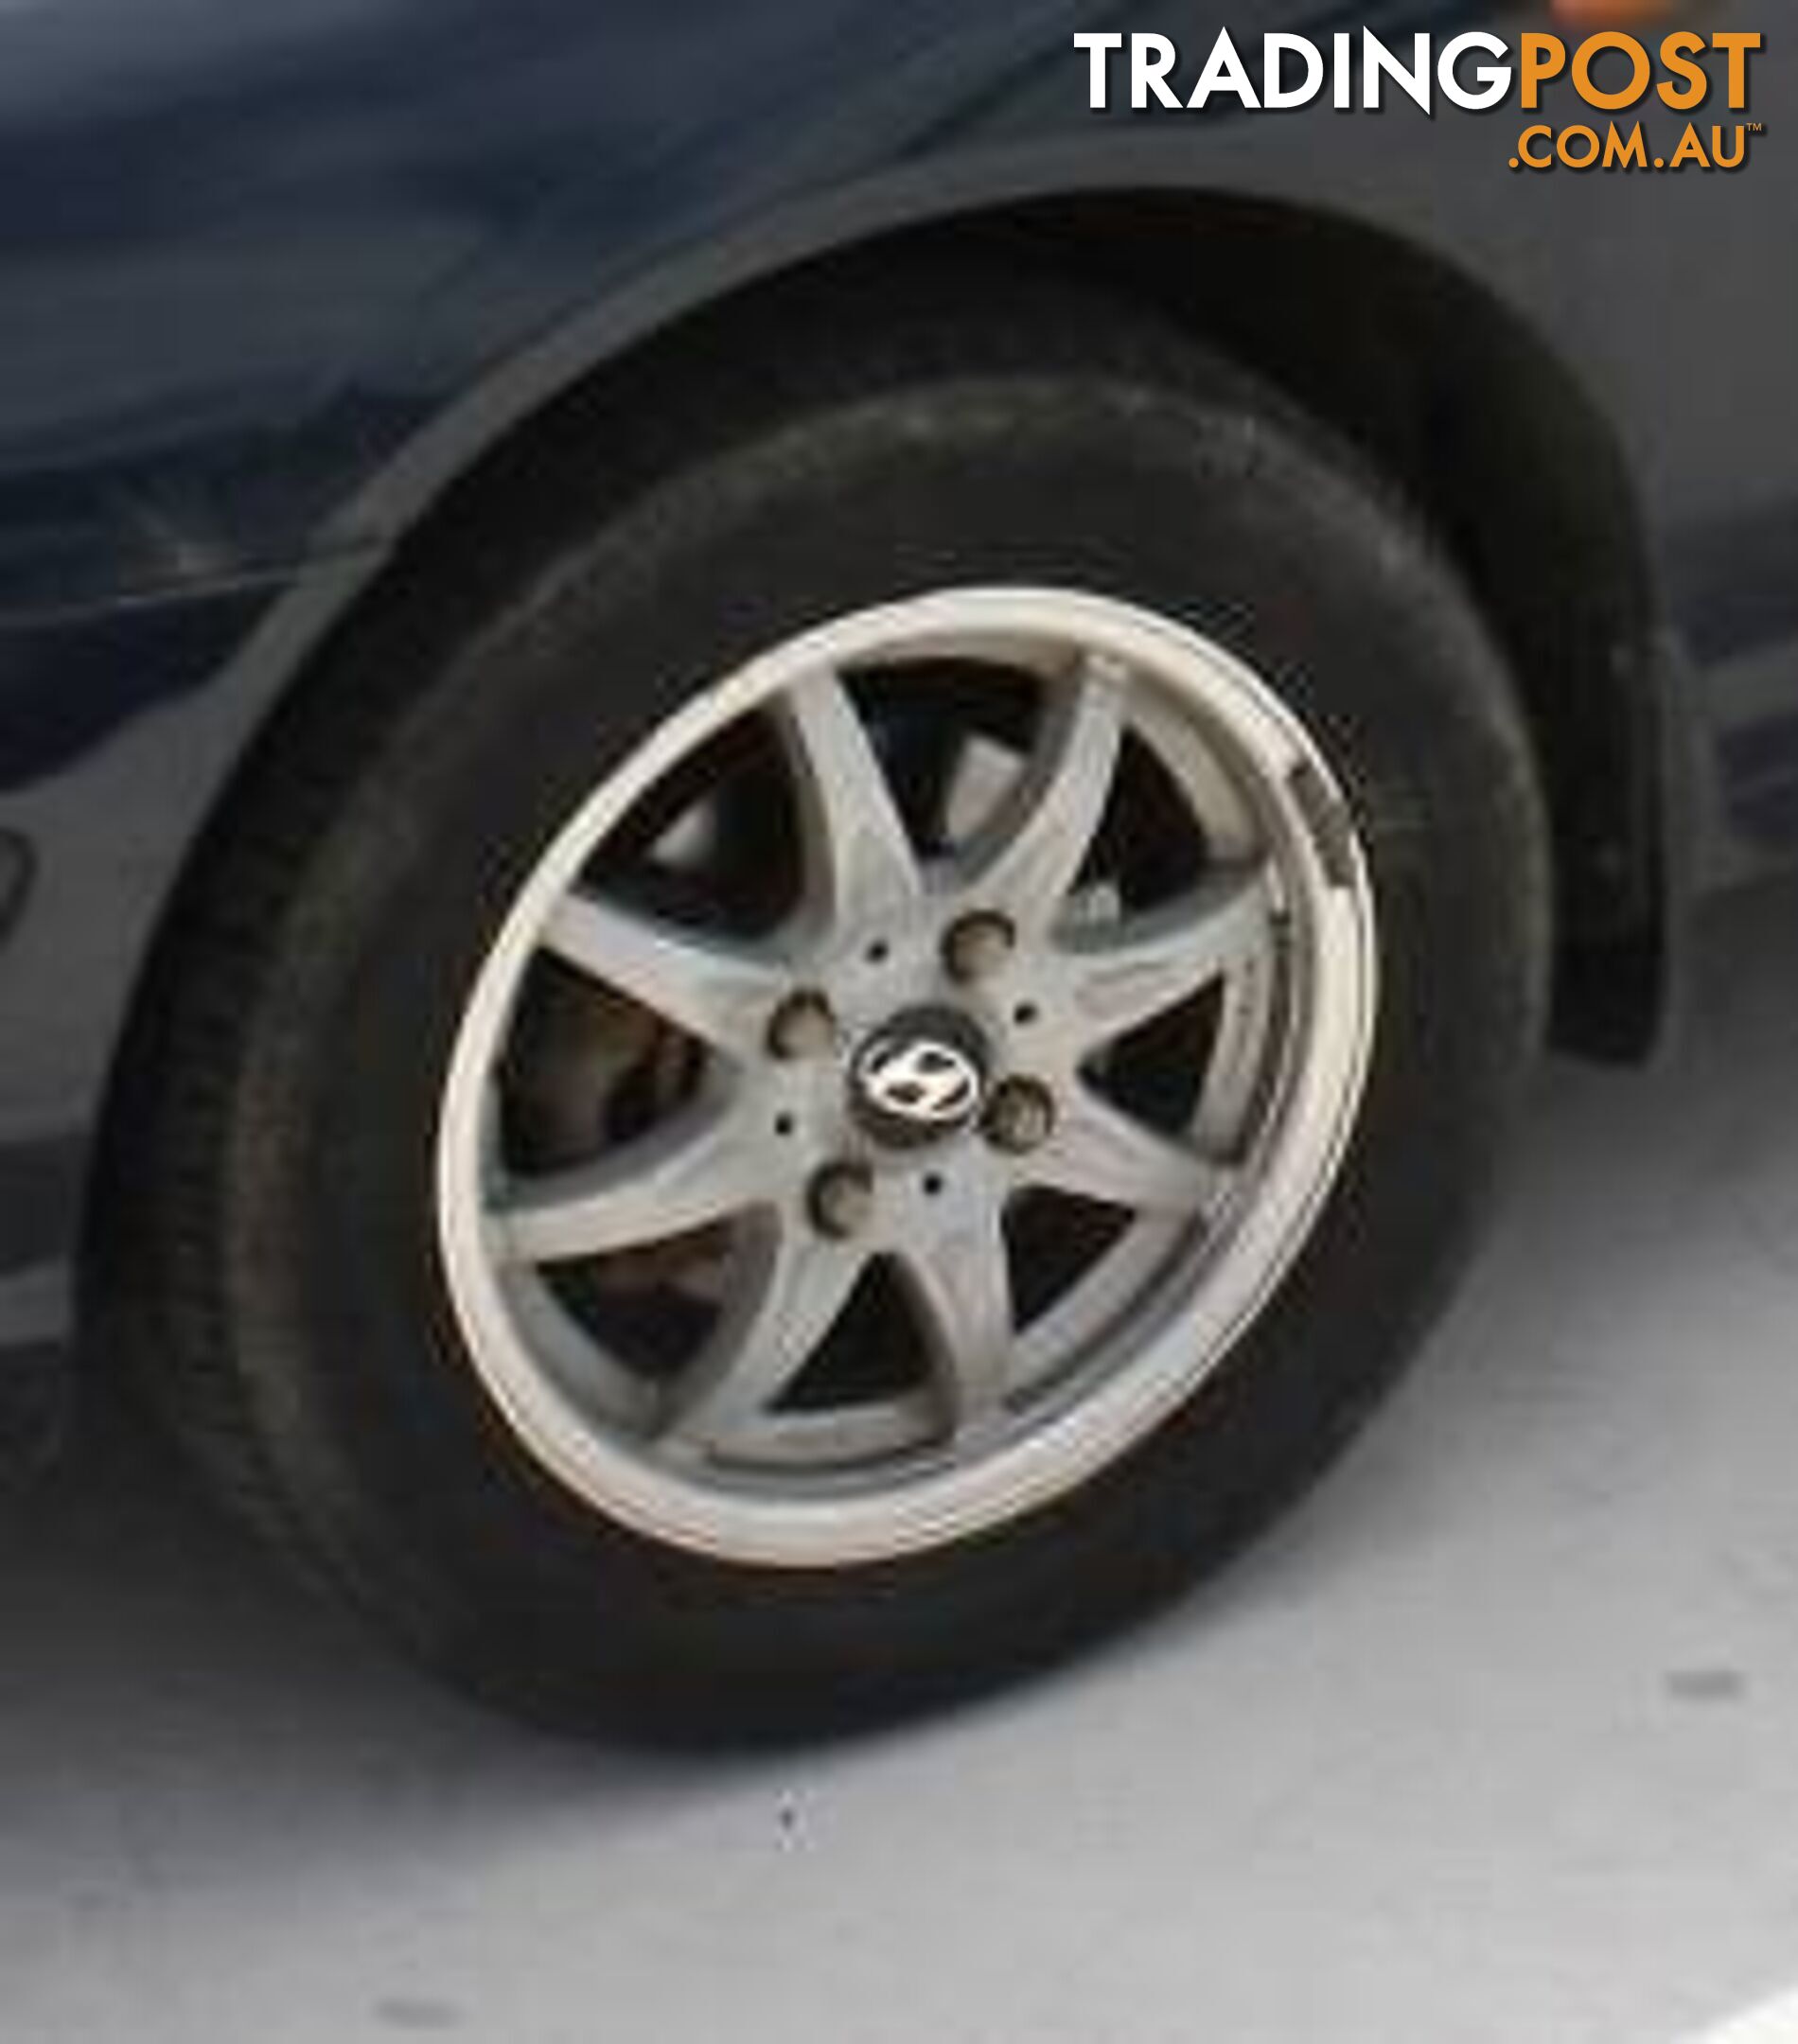 15" MAG WHEELS WITH TYRES (4)